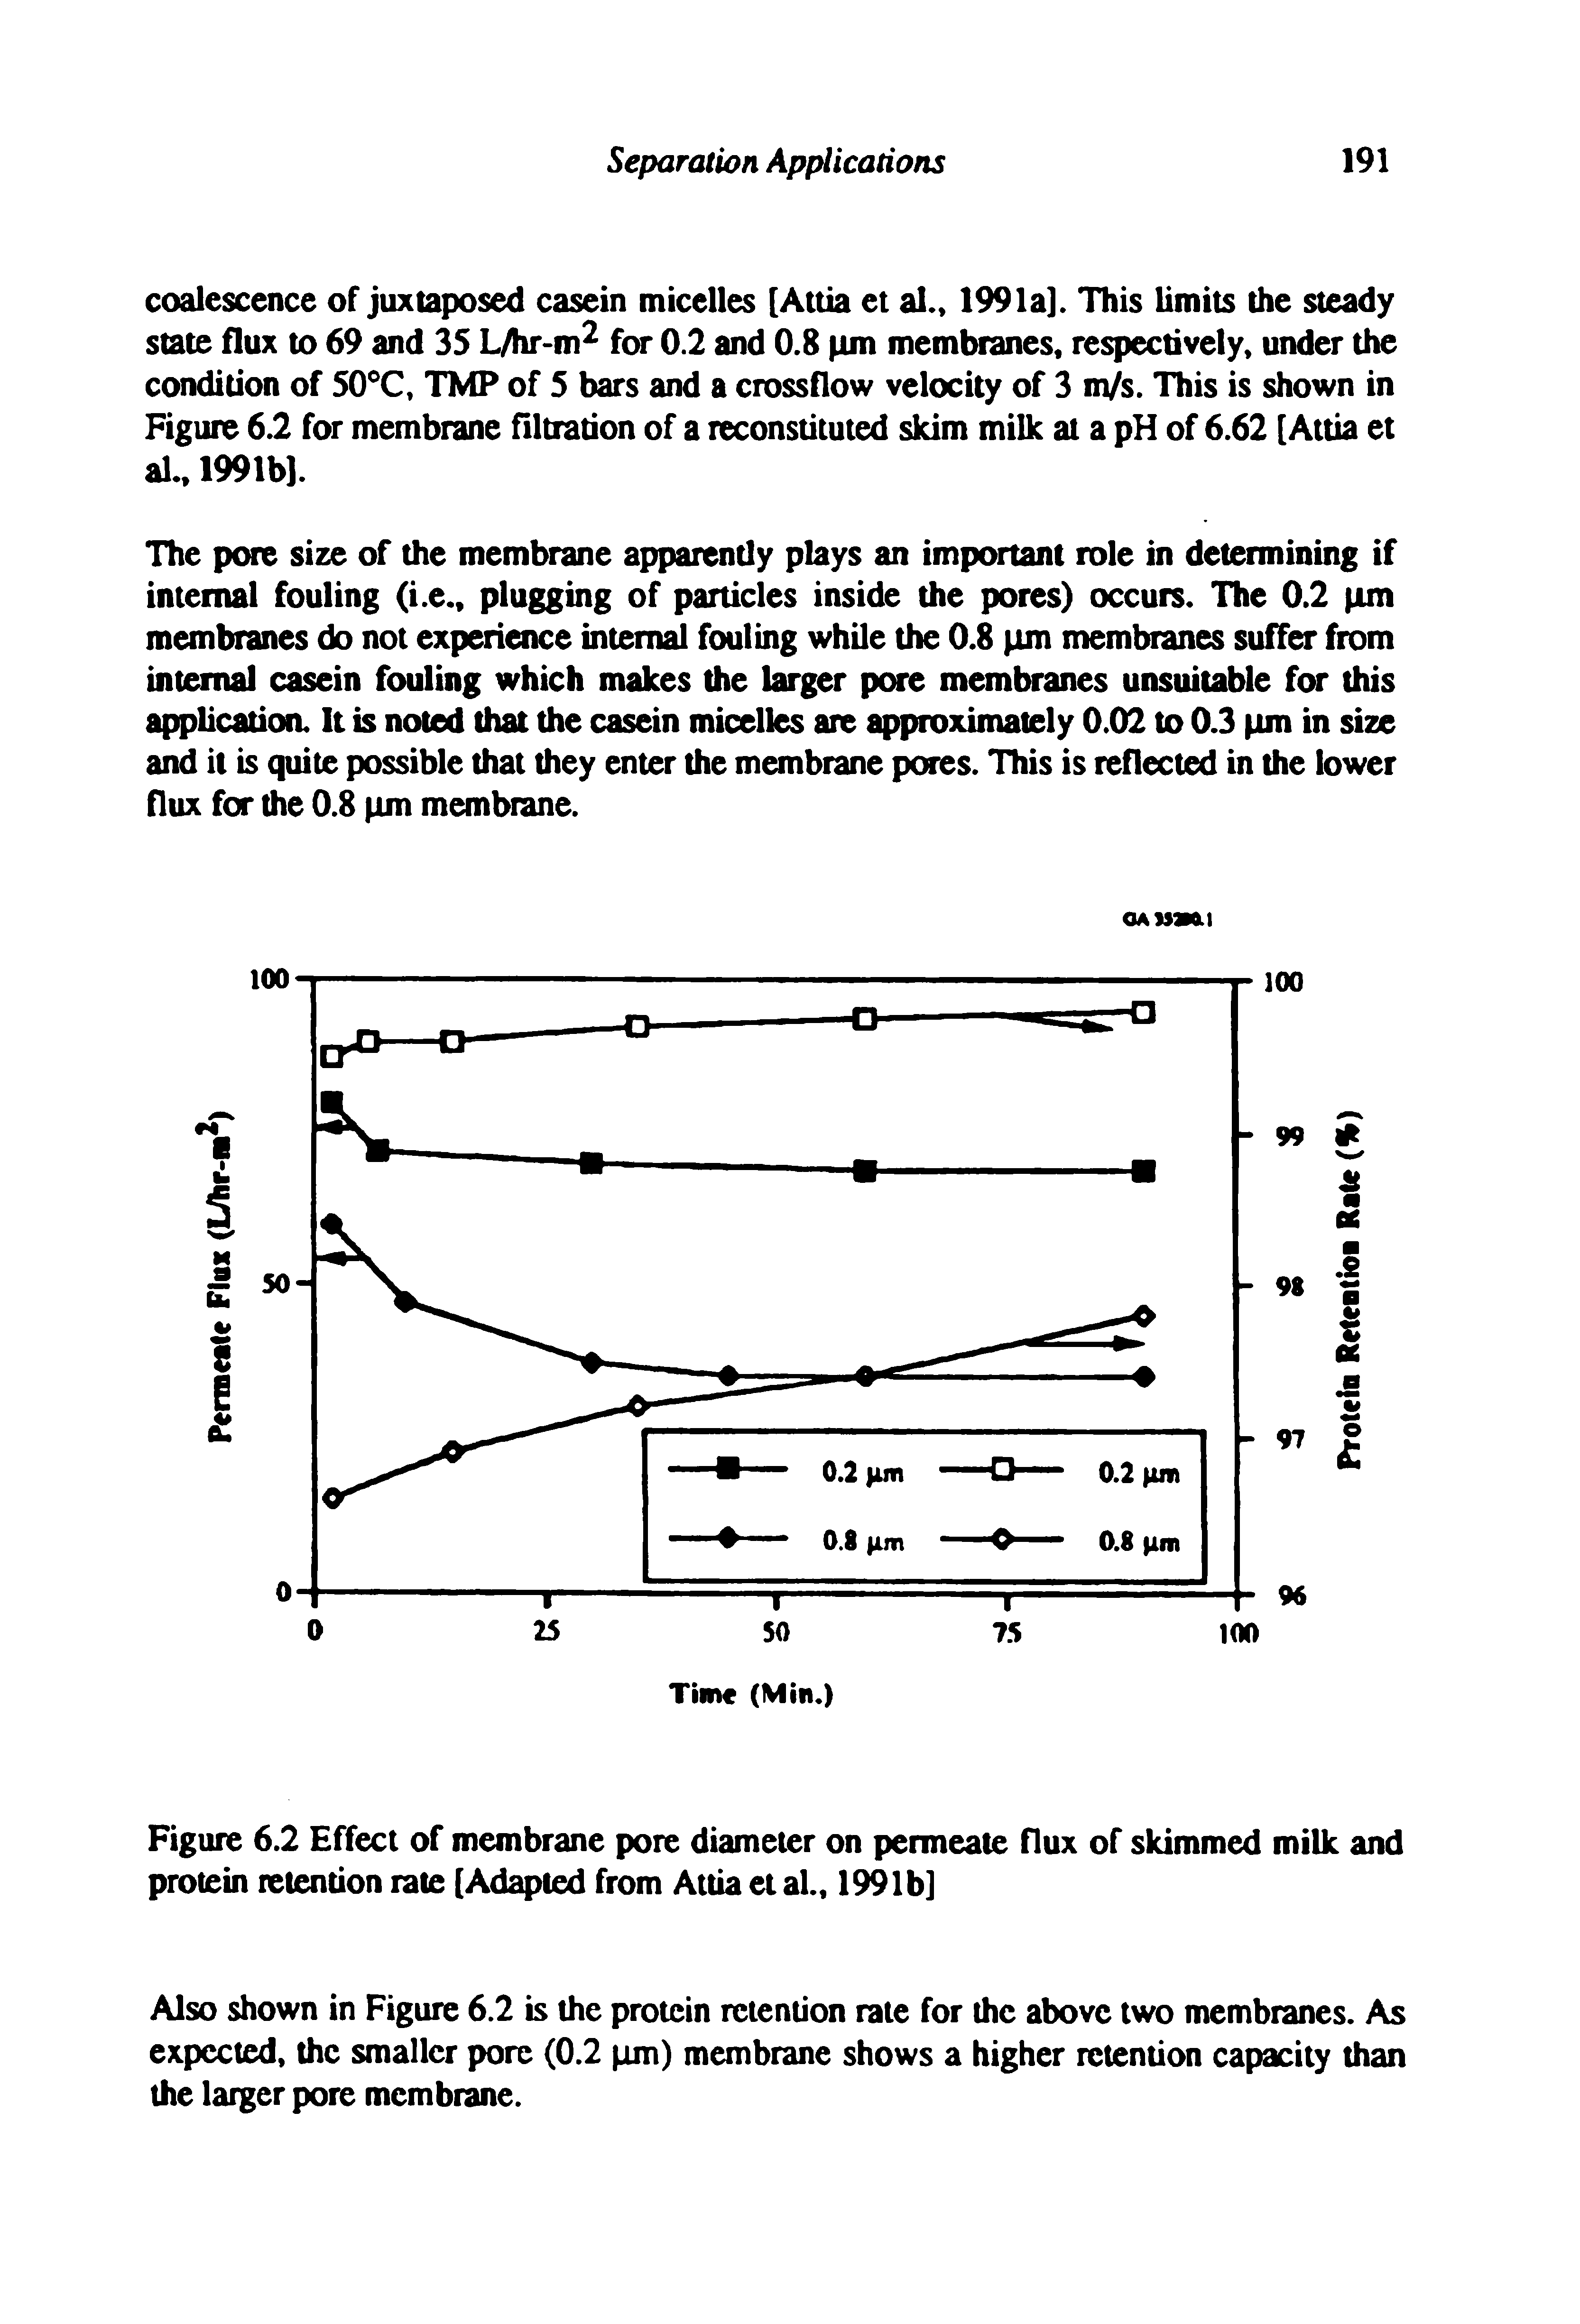 Figure 6.2 Effect of membrane pore diameter on permeate flux of skimmed milk and protein retention rate [Adapted from Attia et al., 1991b]...